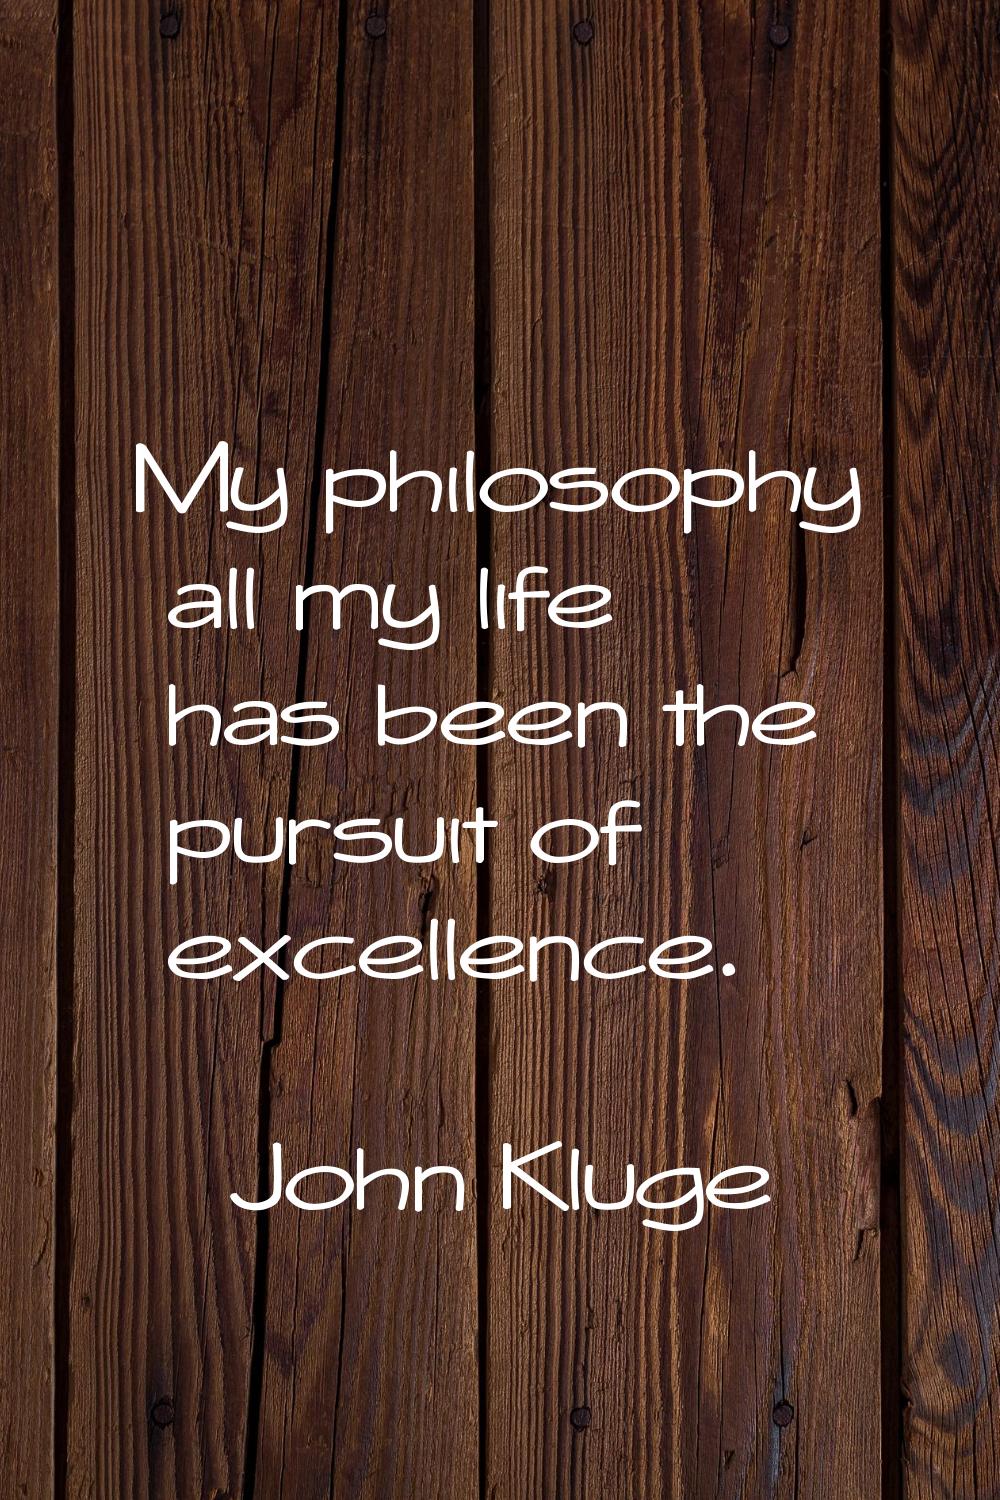 My philosophy all my life has been the pursuit of excellence.